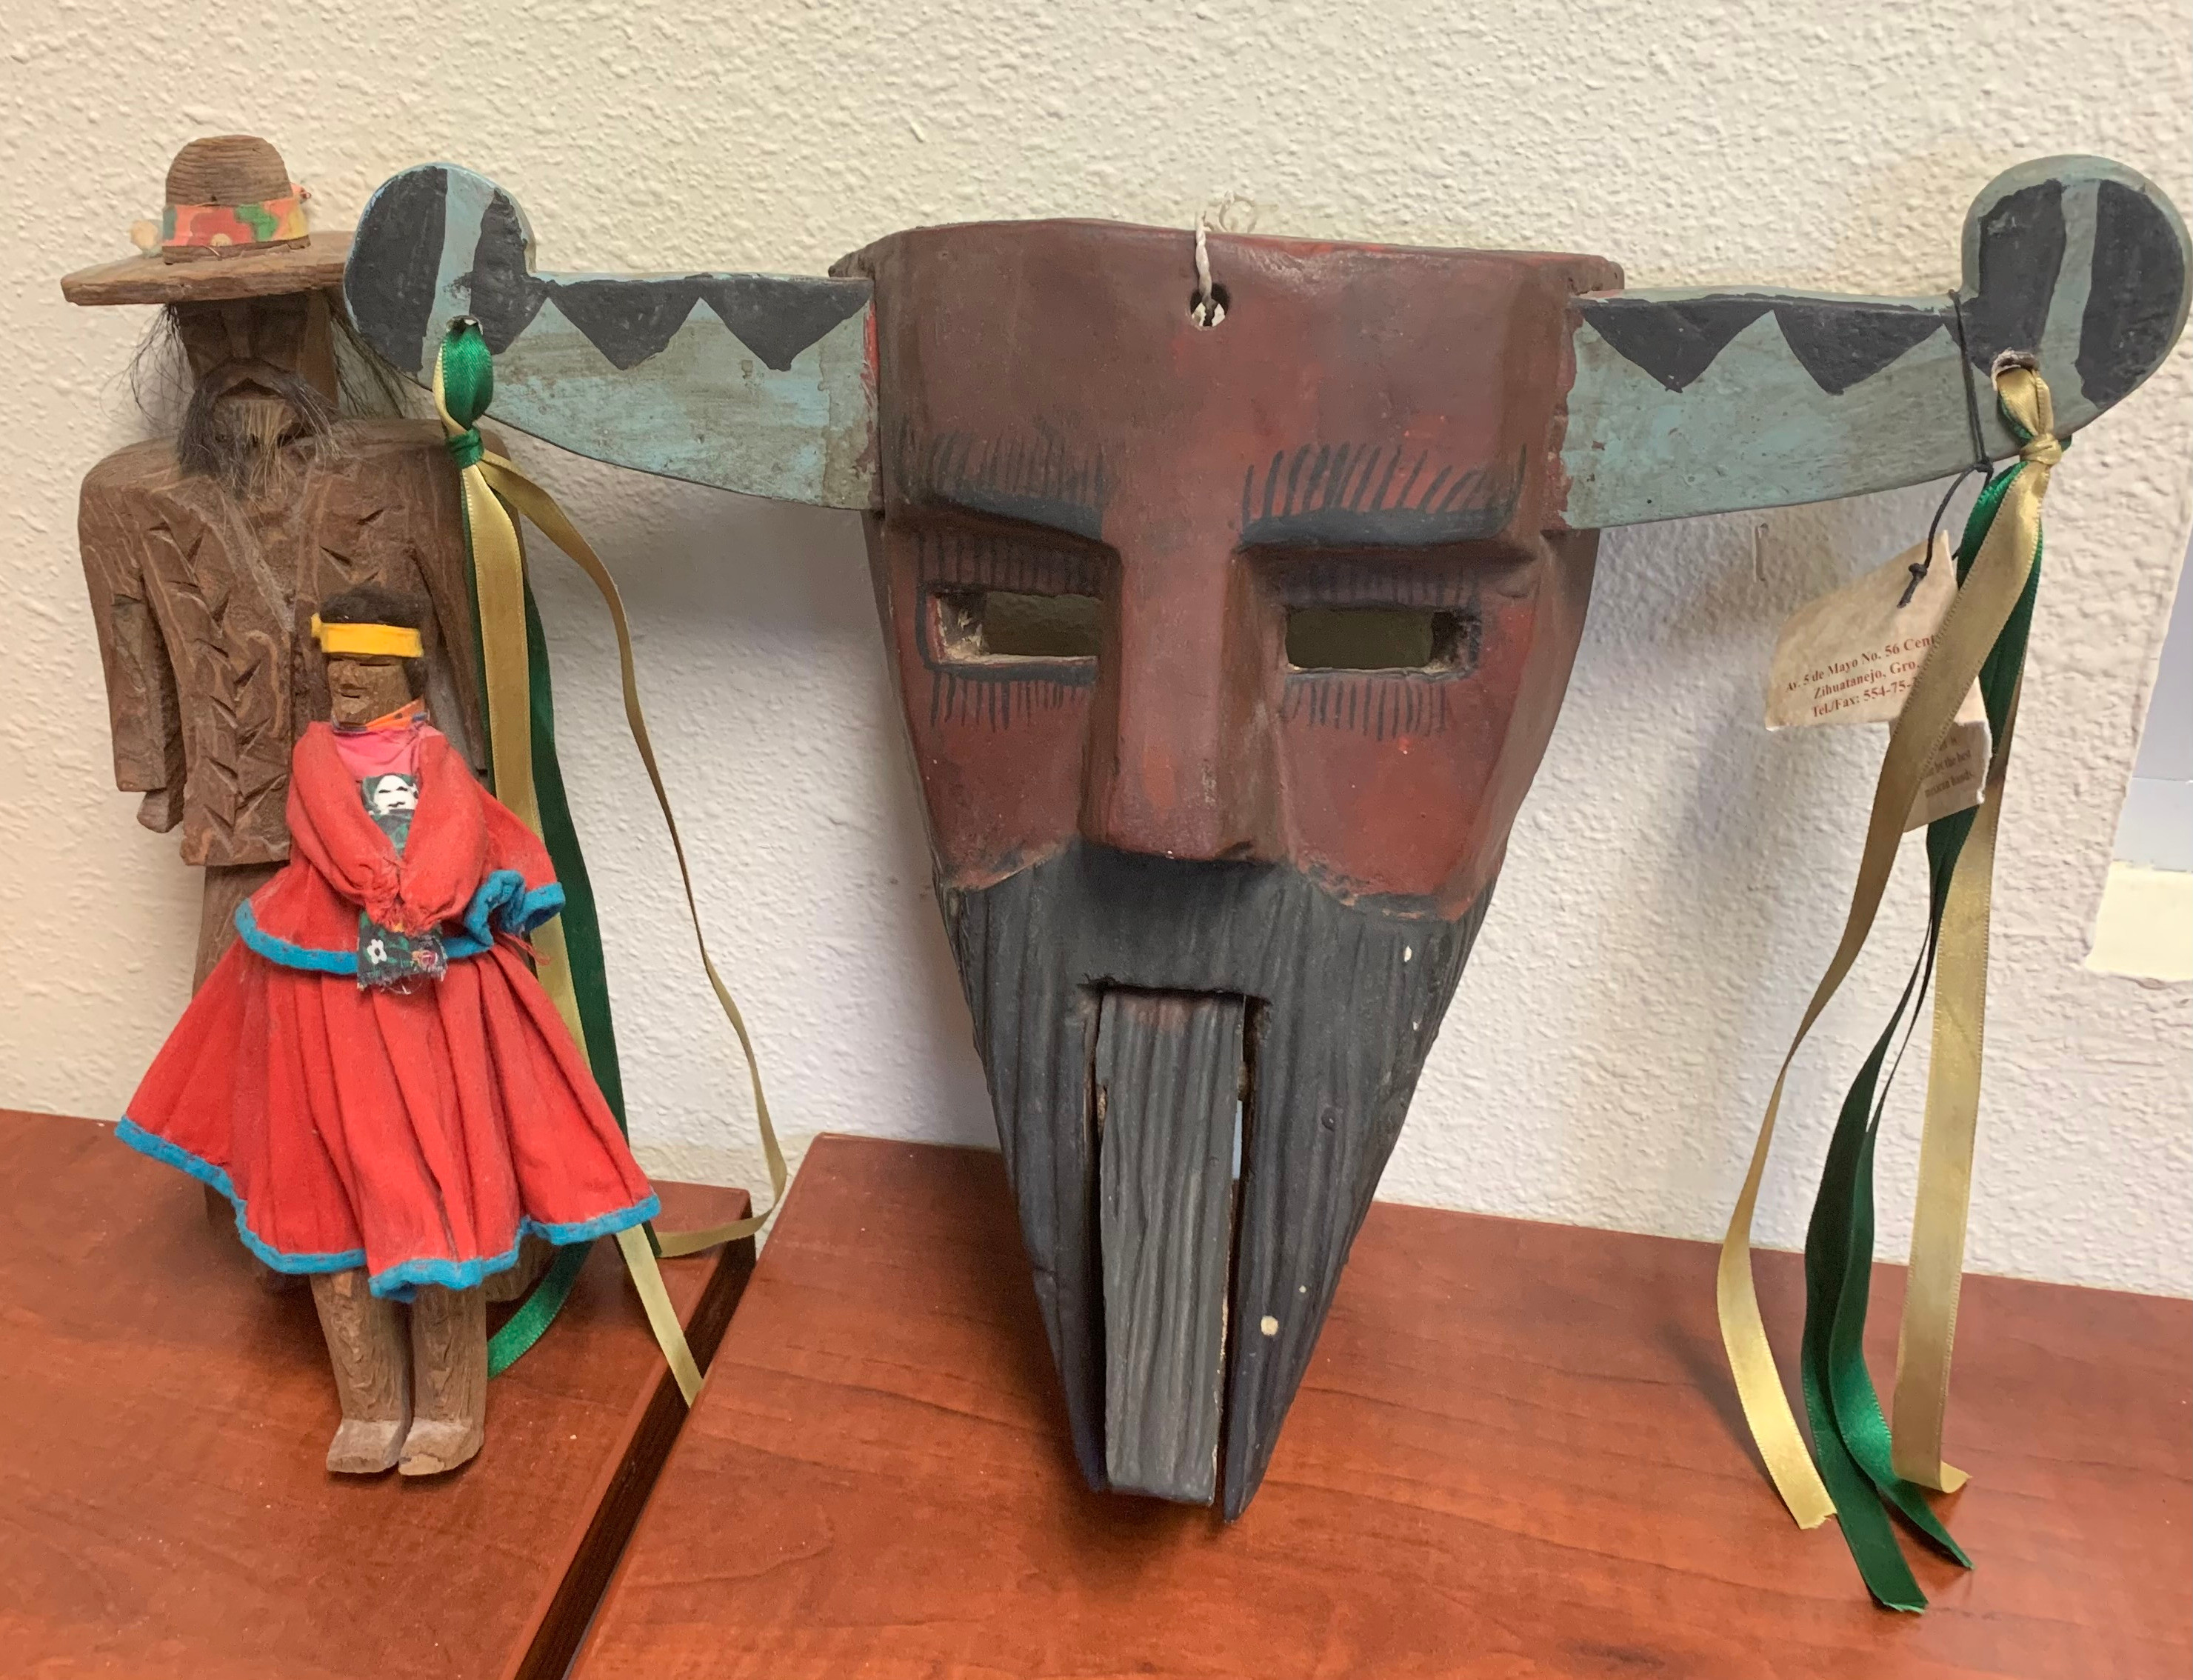 This collection of three hand-carved wooden decorative items from Mexico includes a handsome Mascara Danzantes from Zihautenejo, Guerrero, and a pair of pinewood dolls – one man and one woman – made by Tarahumara/Raramuri people of Chihuahua.  These items will make a fine addition to the decor of any home! Package total estimated value:  $250.00